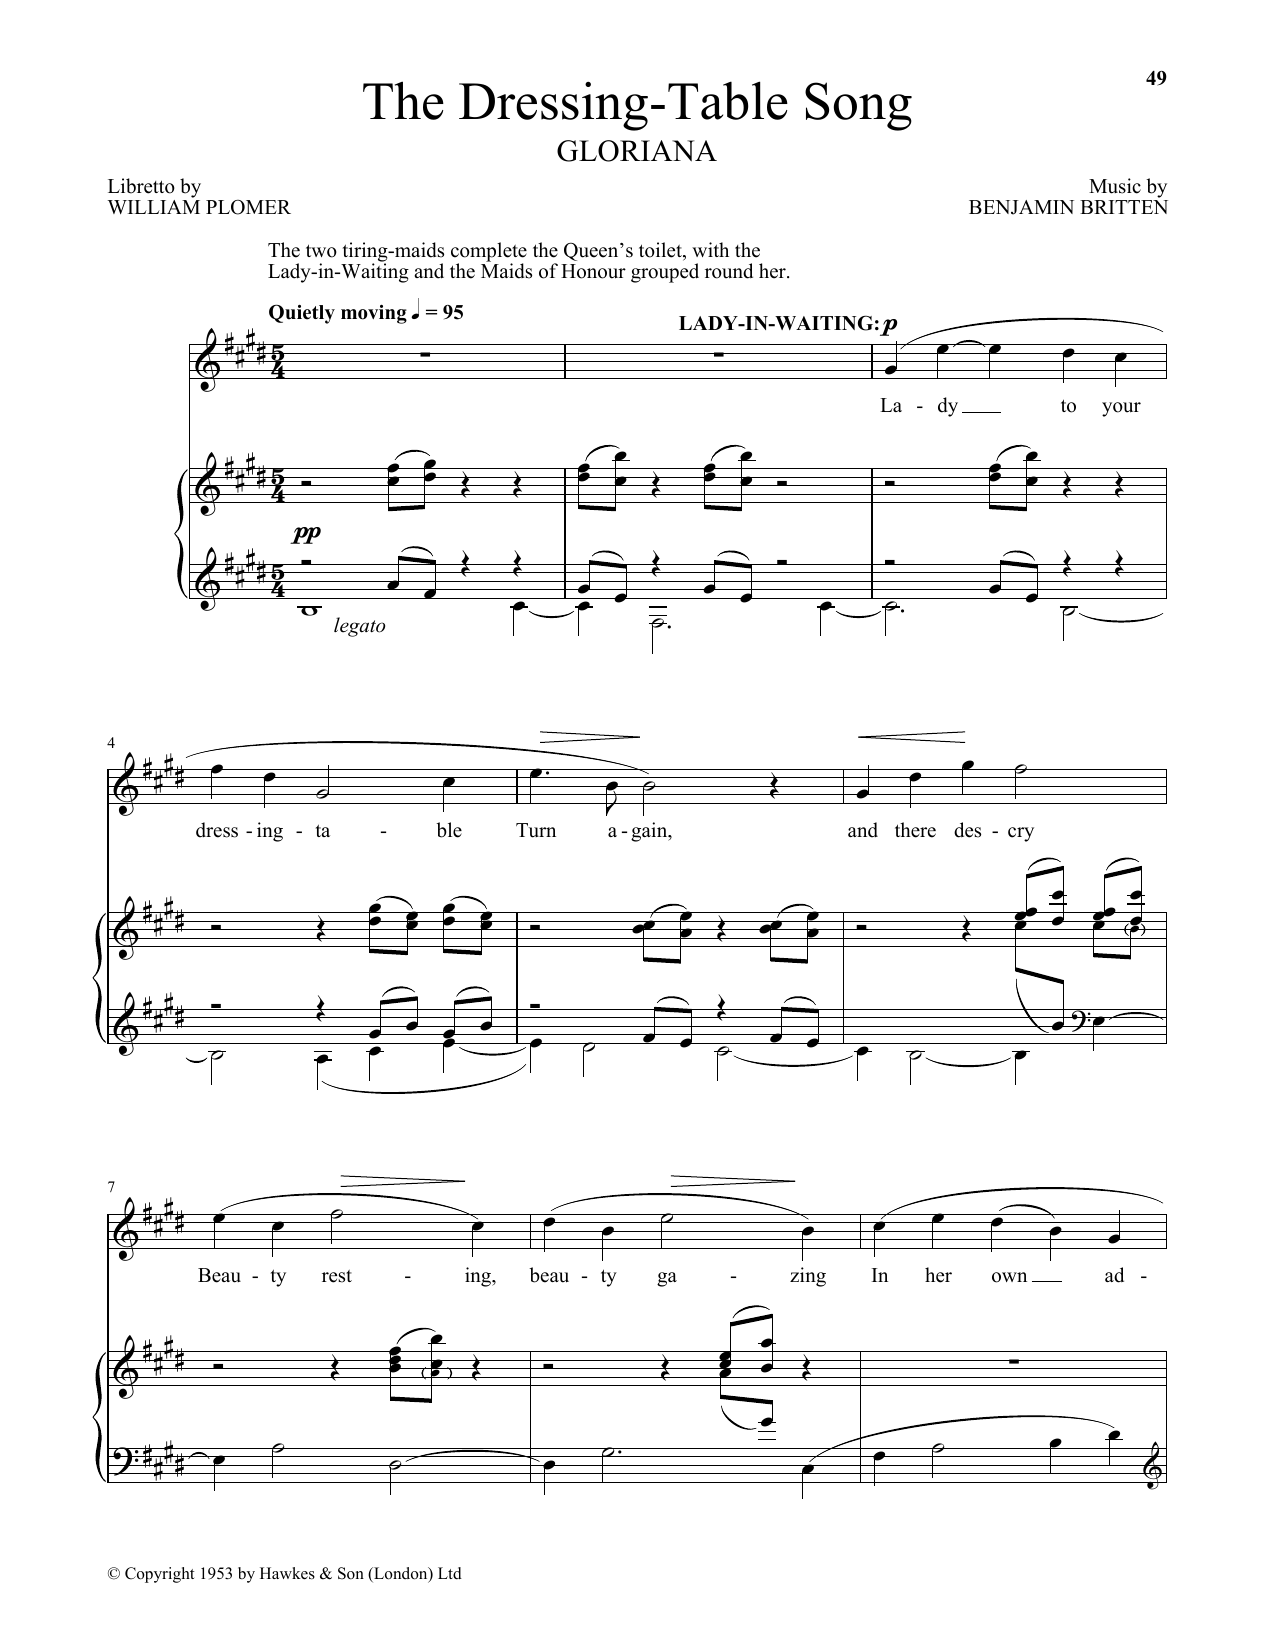 Download Benjamin Britten The Dressing-Table Song (from Gloriana) Sheet Music